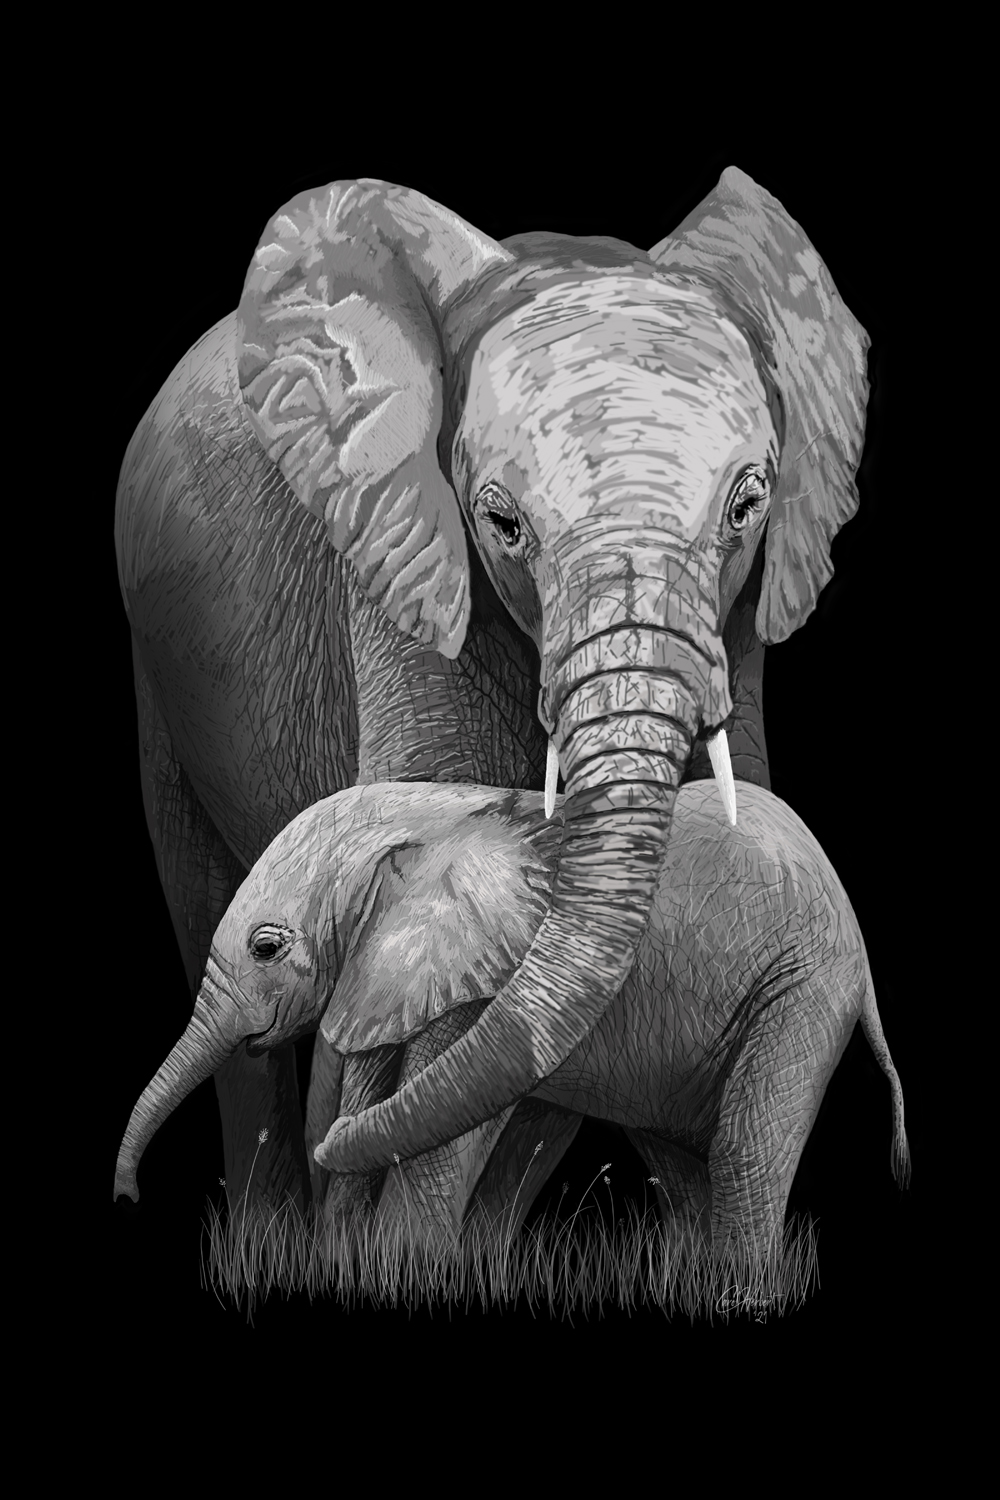 Drawing of a Mother Elephant with her baby